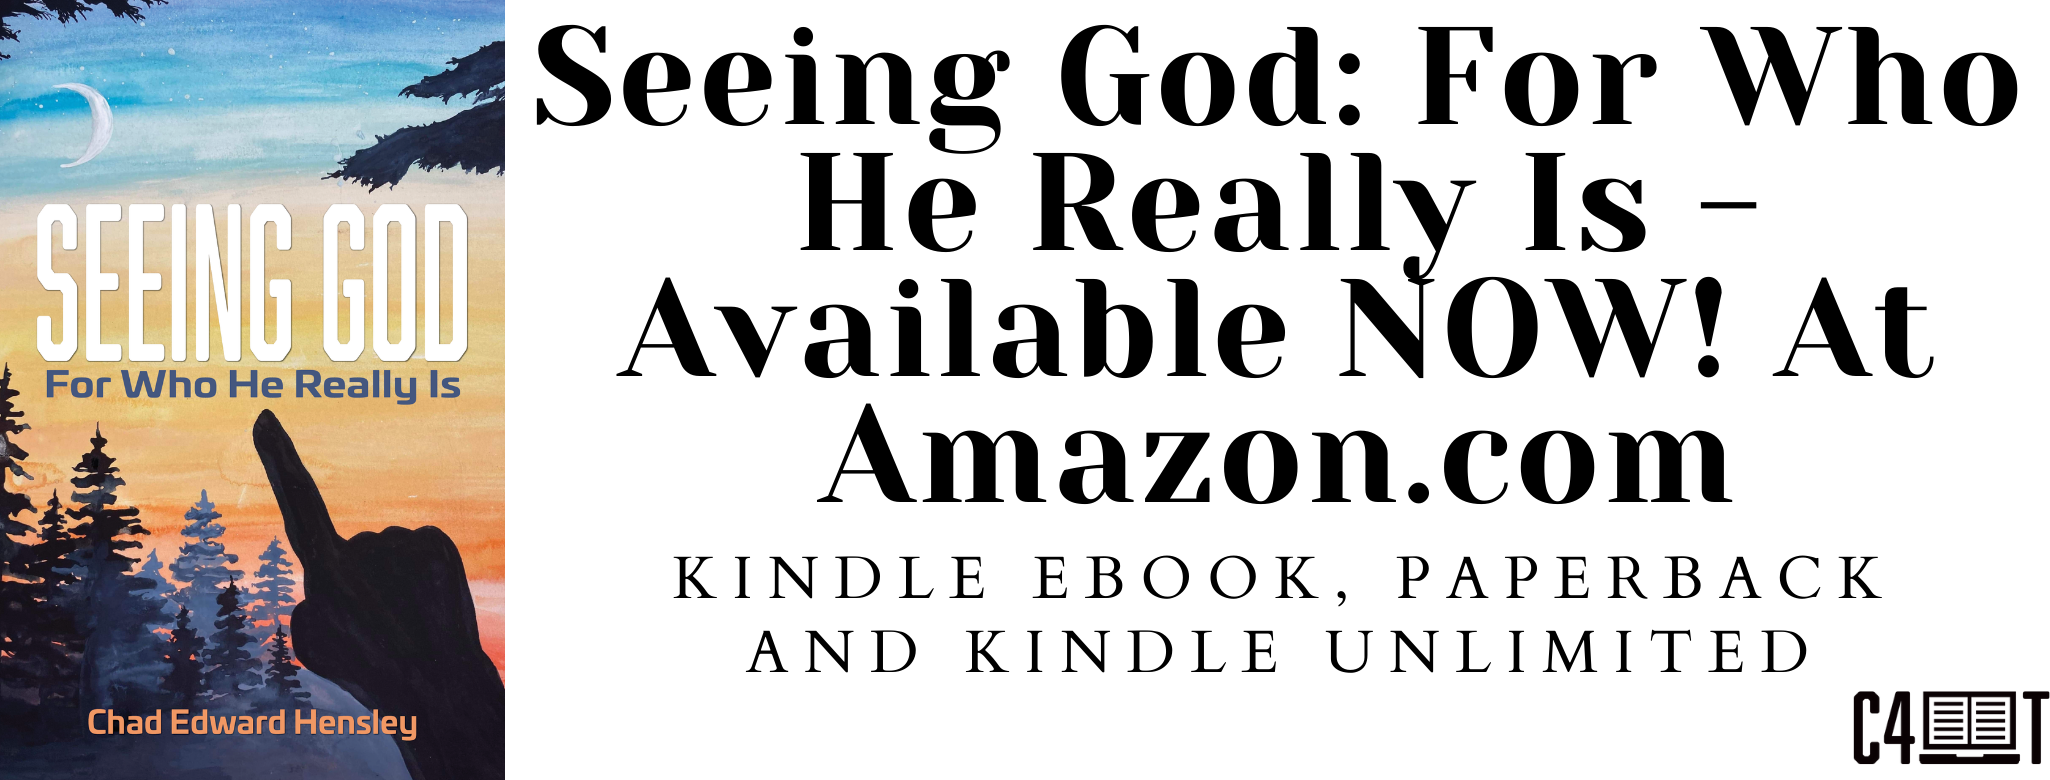 Seeing God: For Who He Really Is - Available Now!